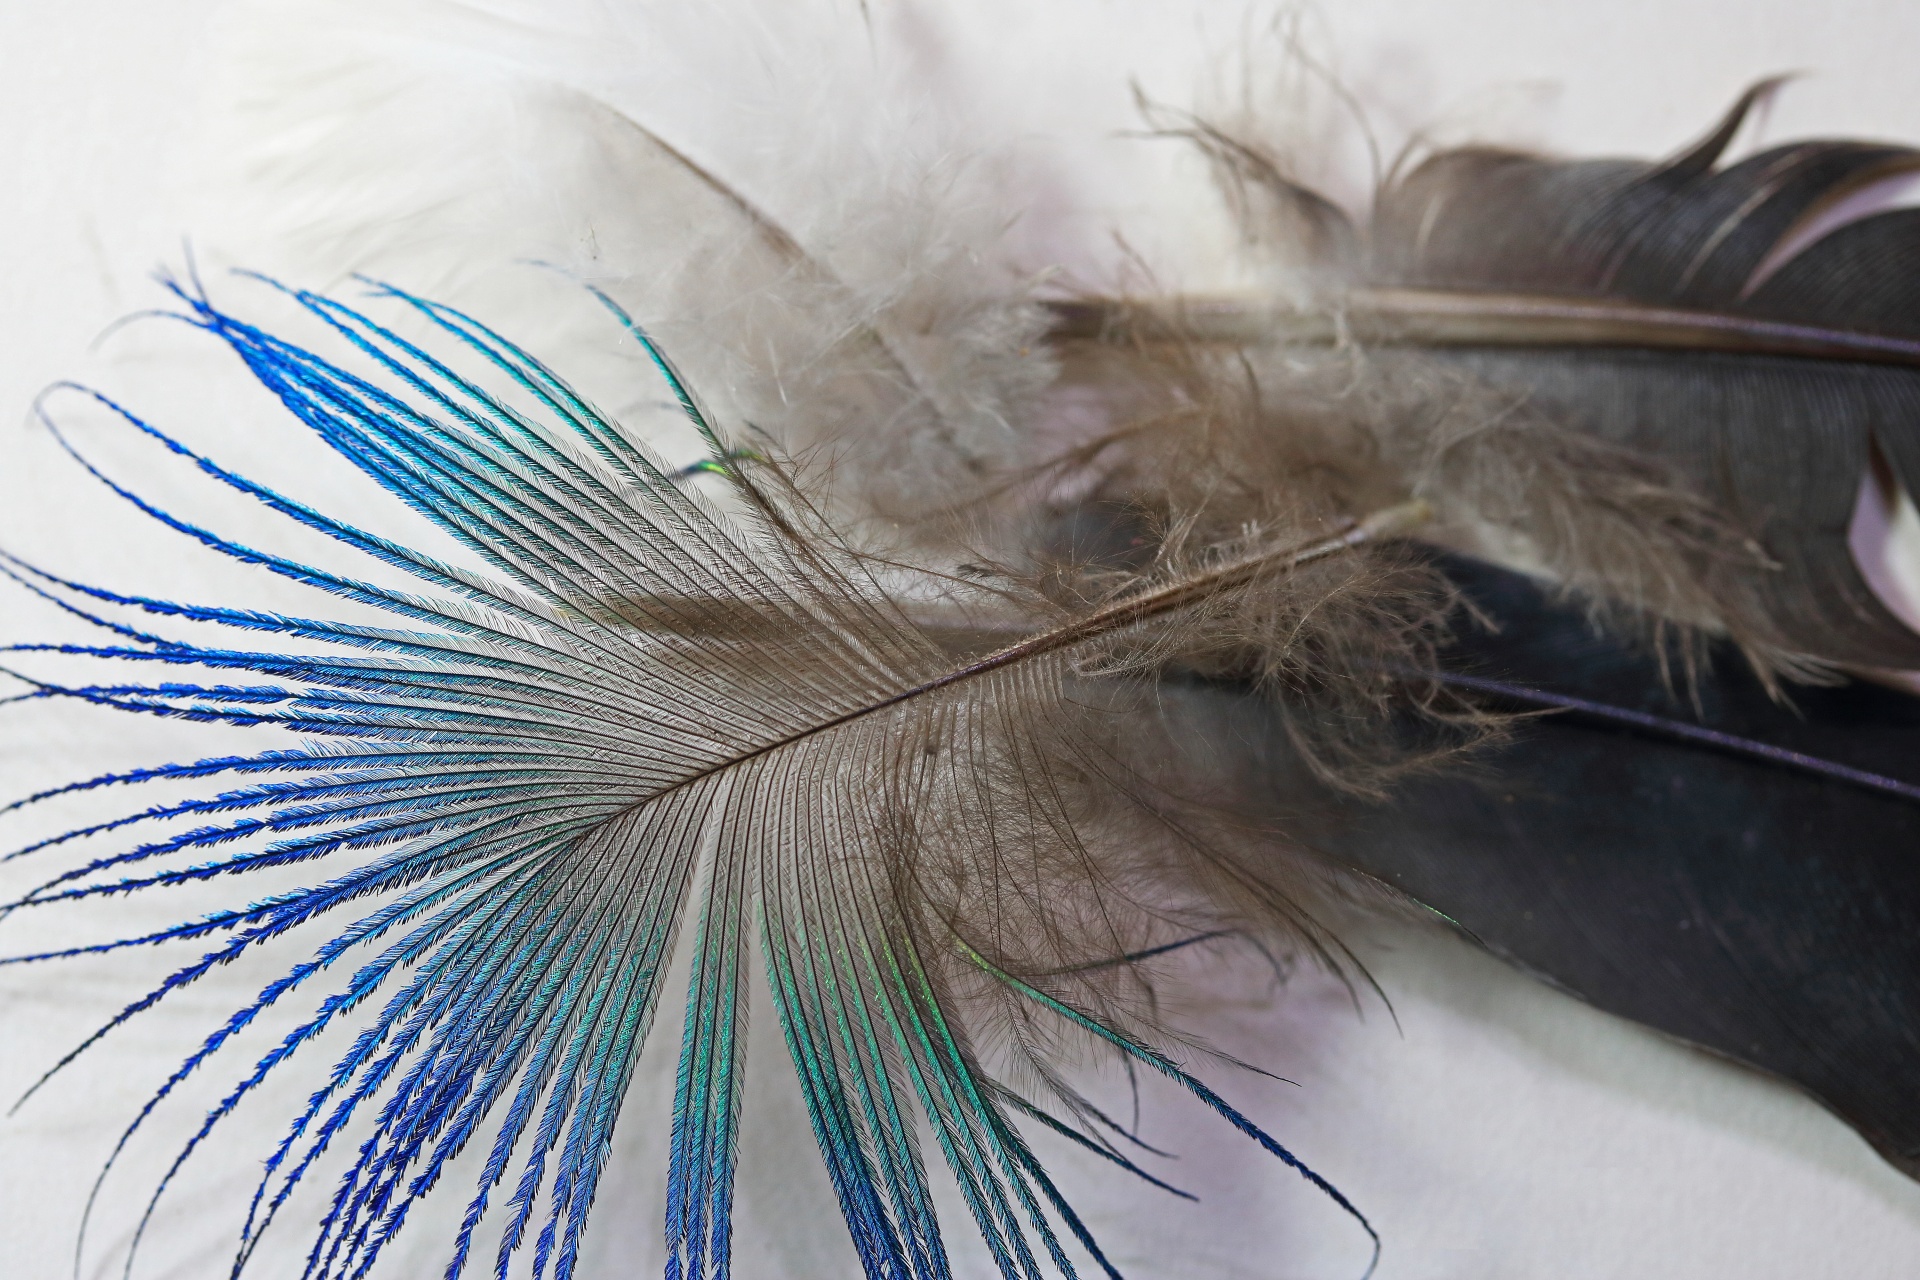 Small Irredescant Peacock Feather